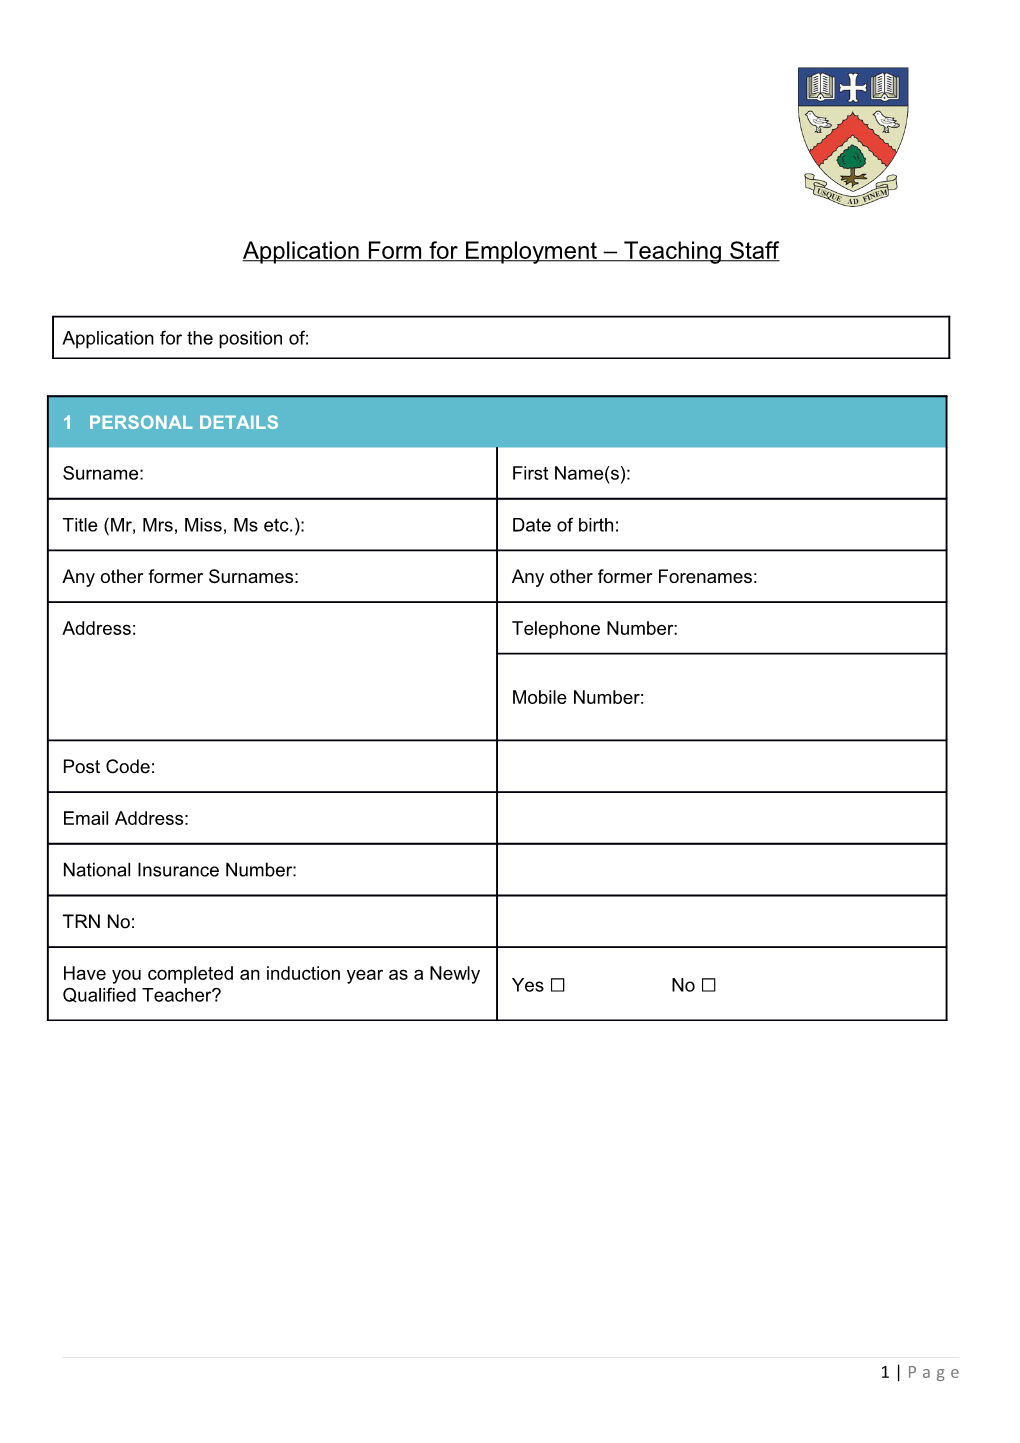 Application Form for Employment Teaching Staff